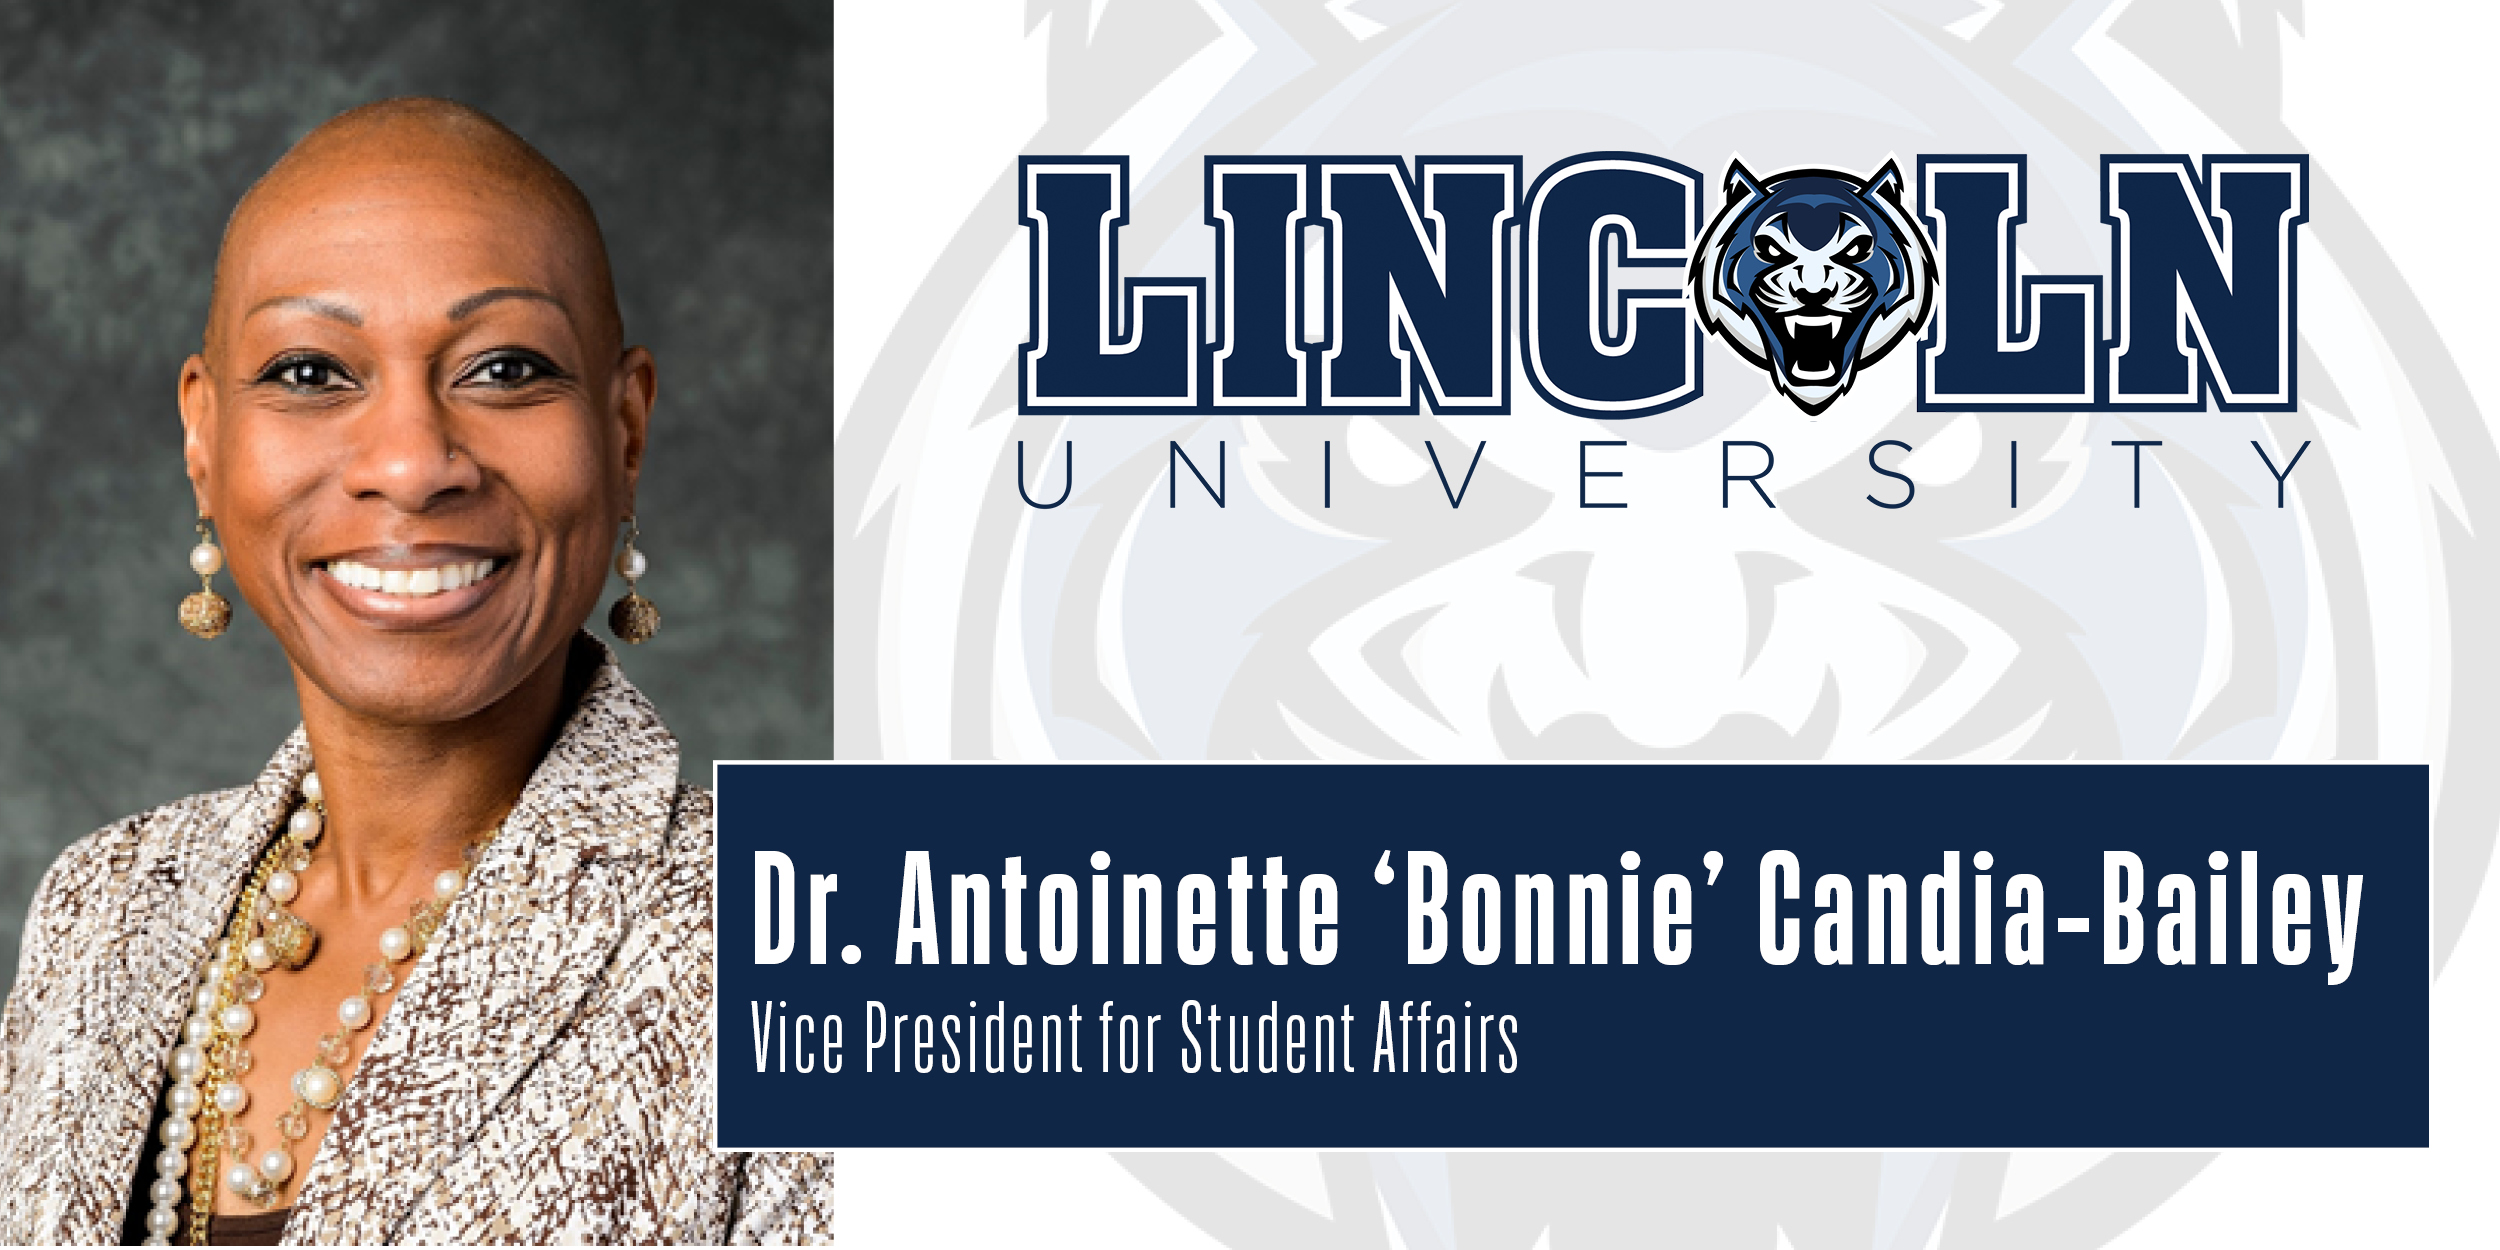 Lincoln University Vice President for Student Affairs Dr. Antoinette “Bonnie” Candia-Bailey '98